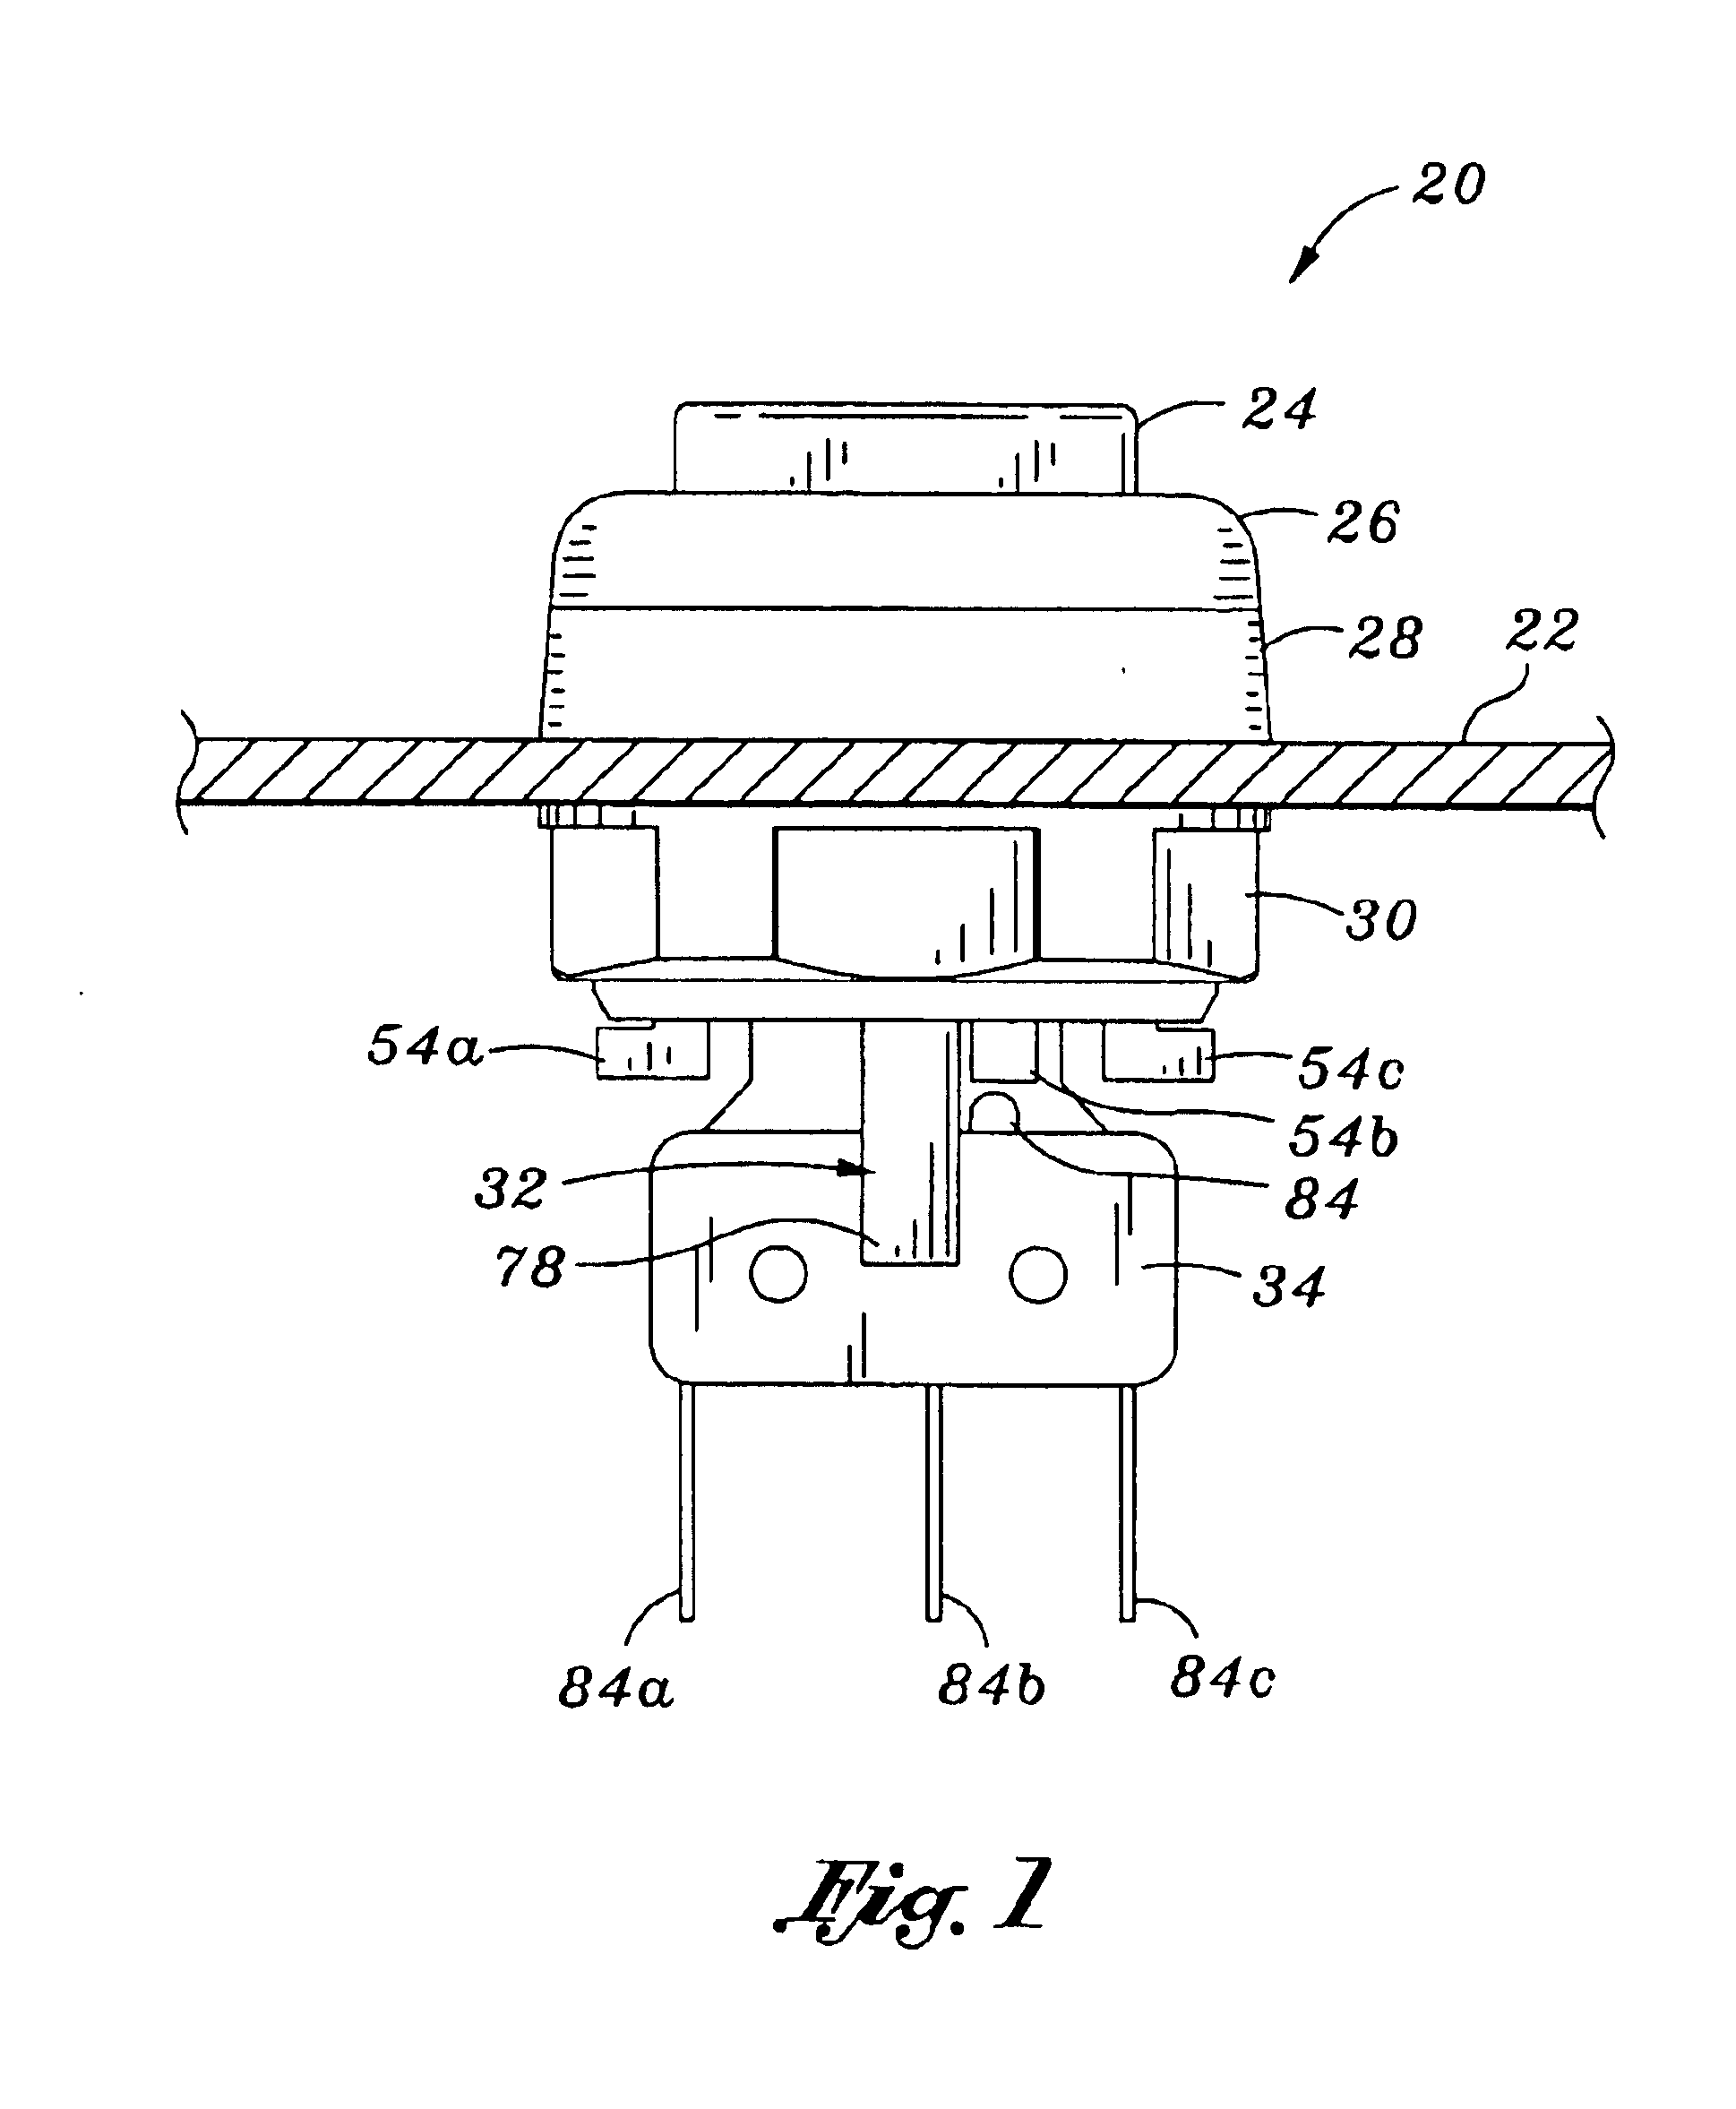 Method and apparatus for removing and replacing bulb of push-button type electrical switch